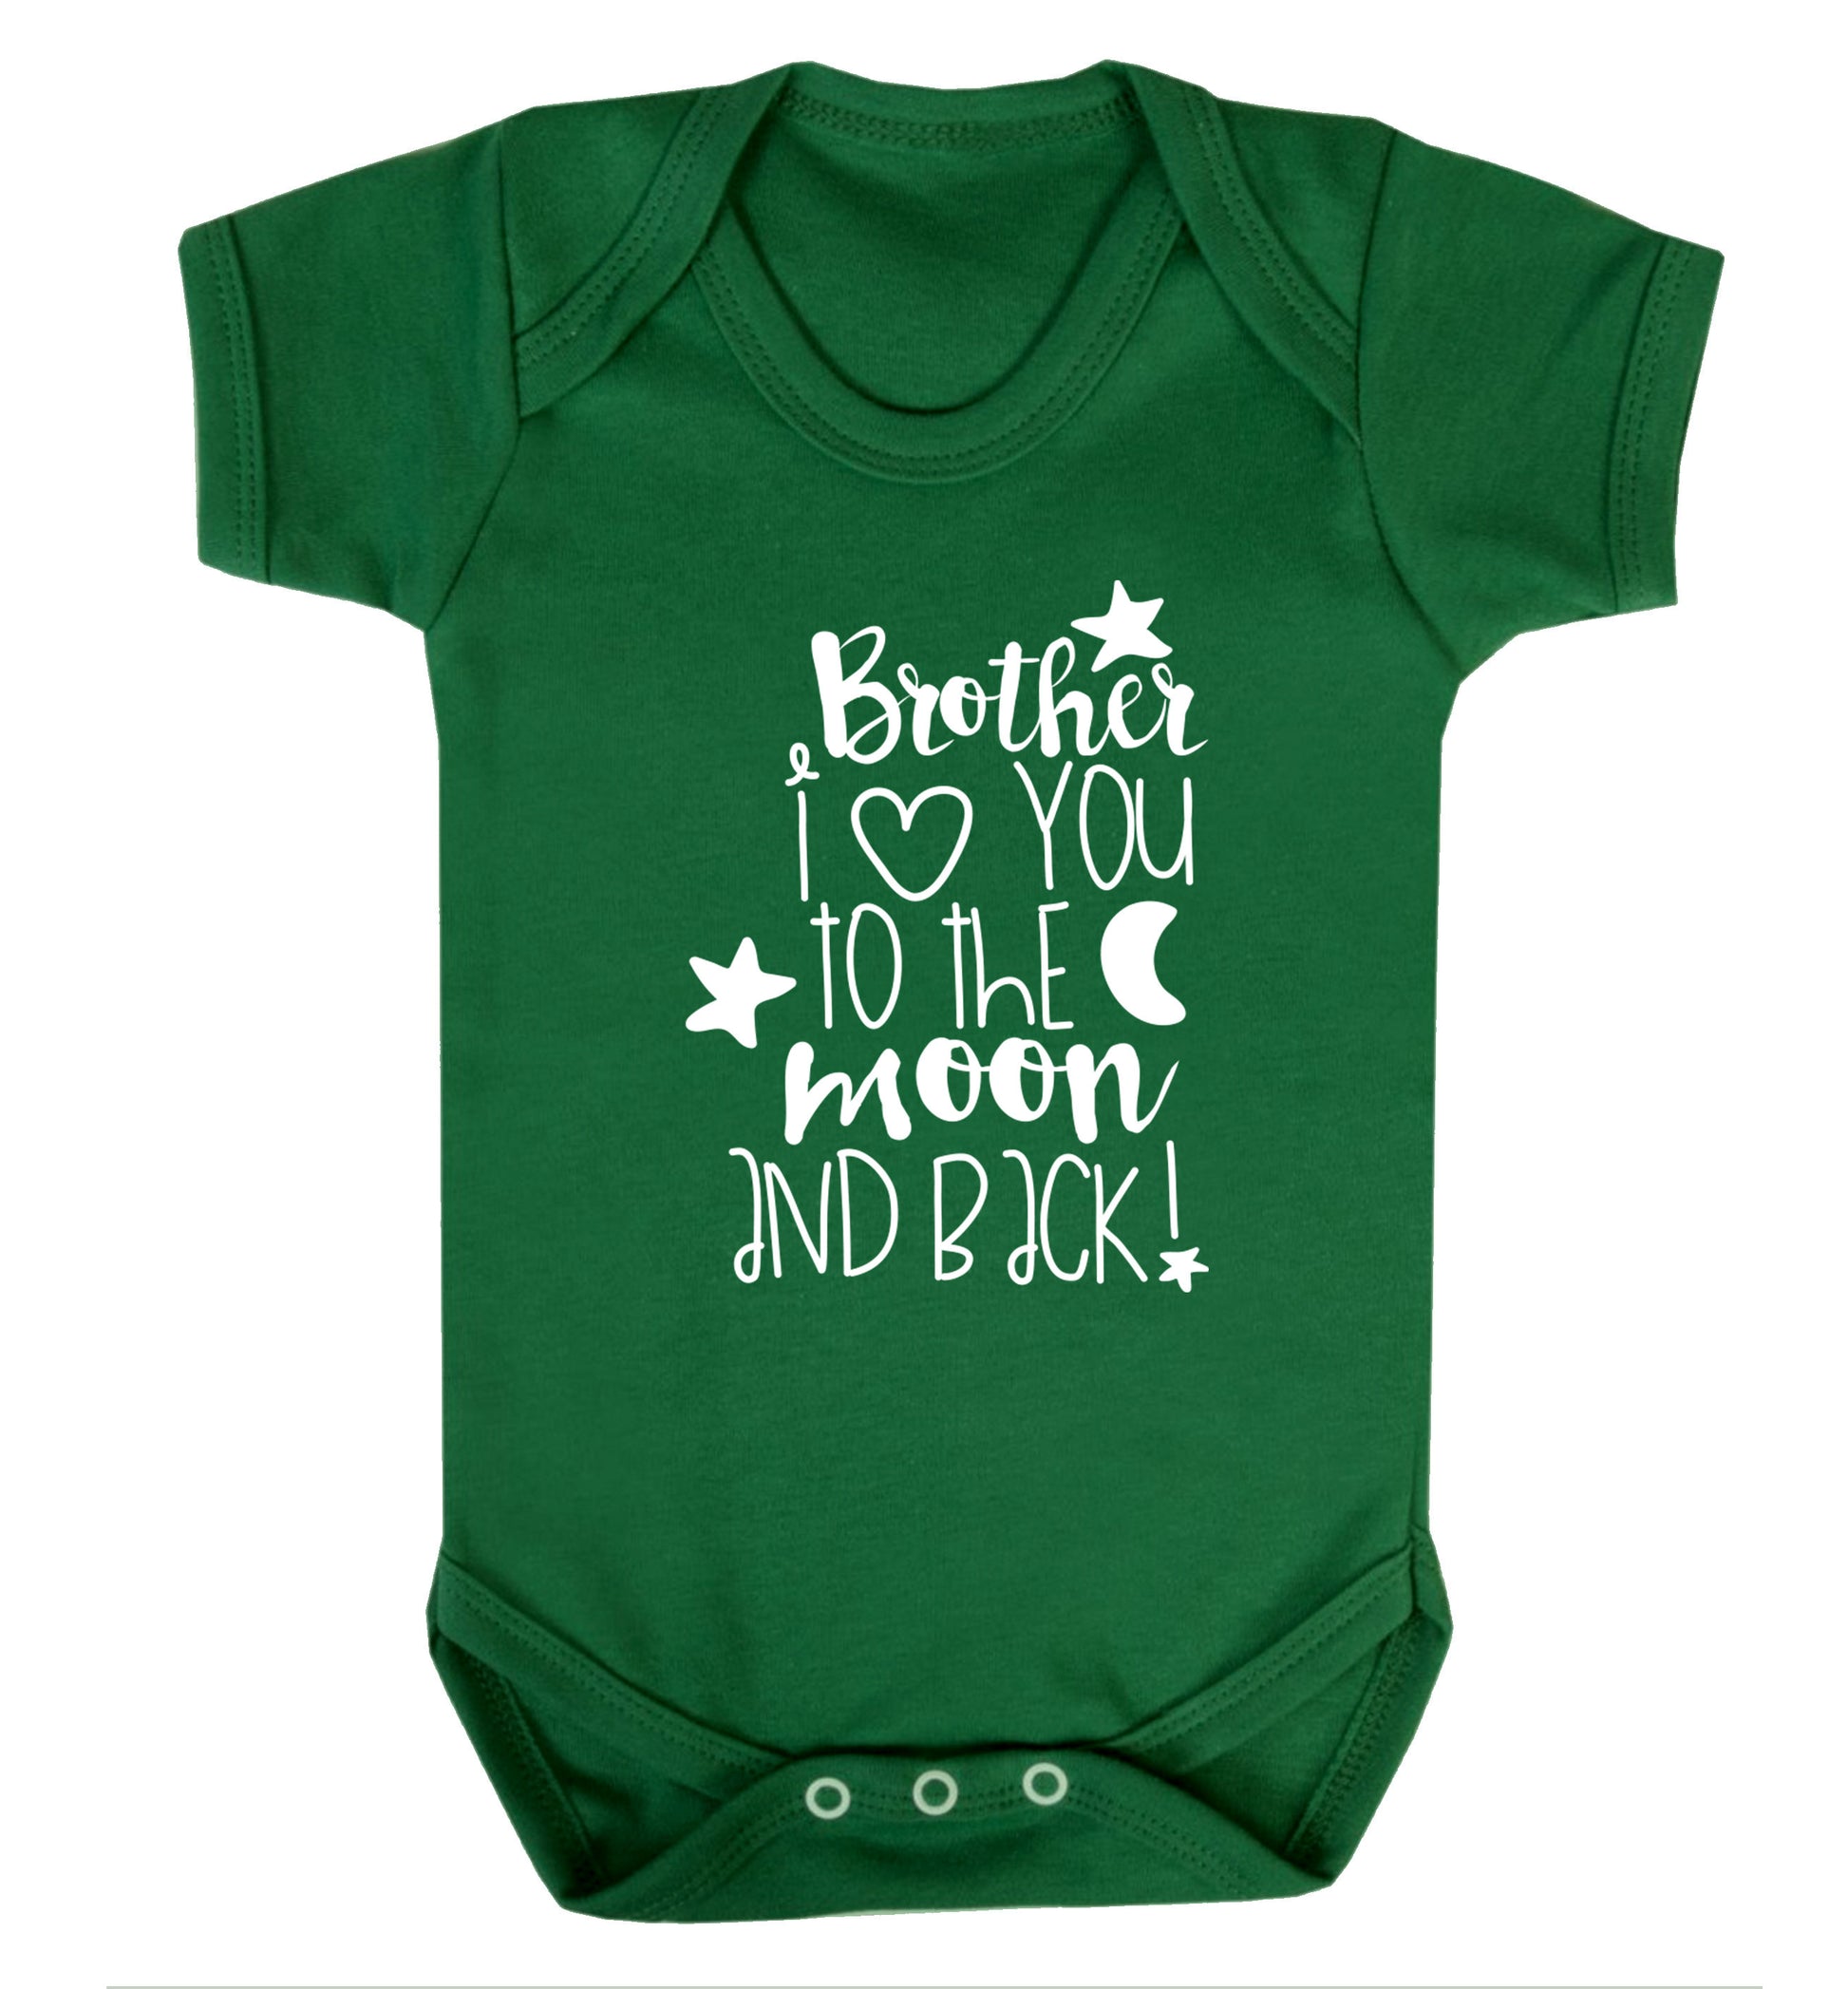 Brother I love you to the moon and back Baby Vest green 18-24 months